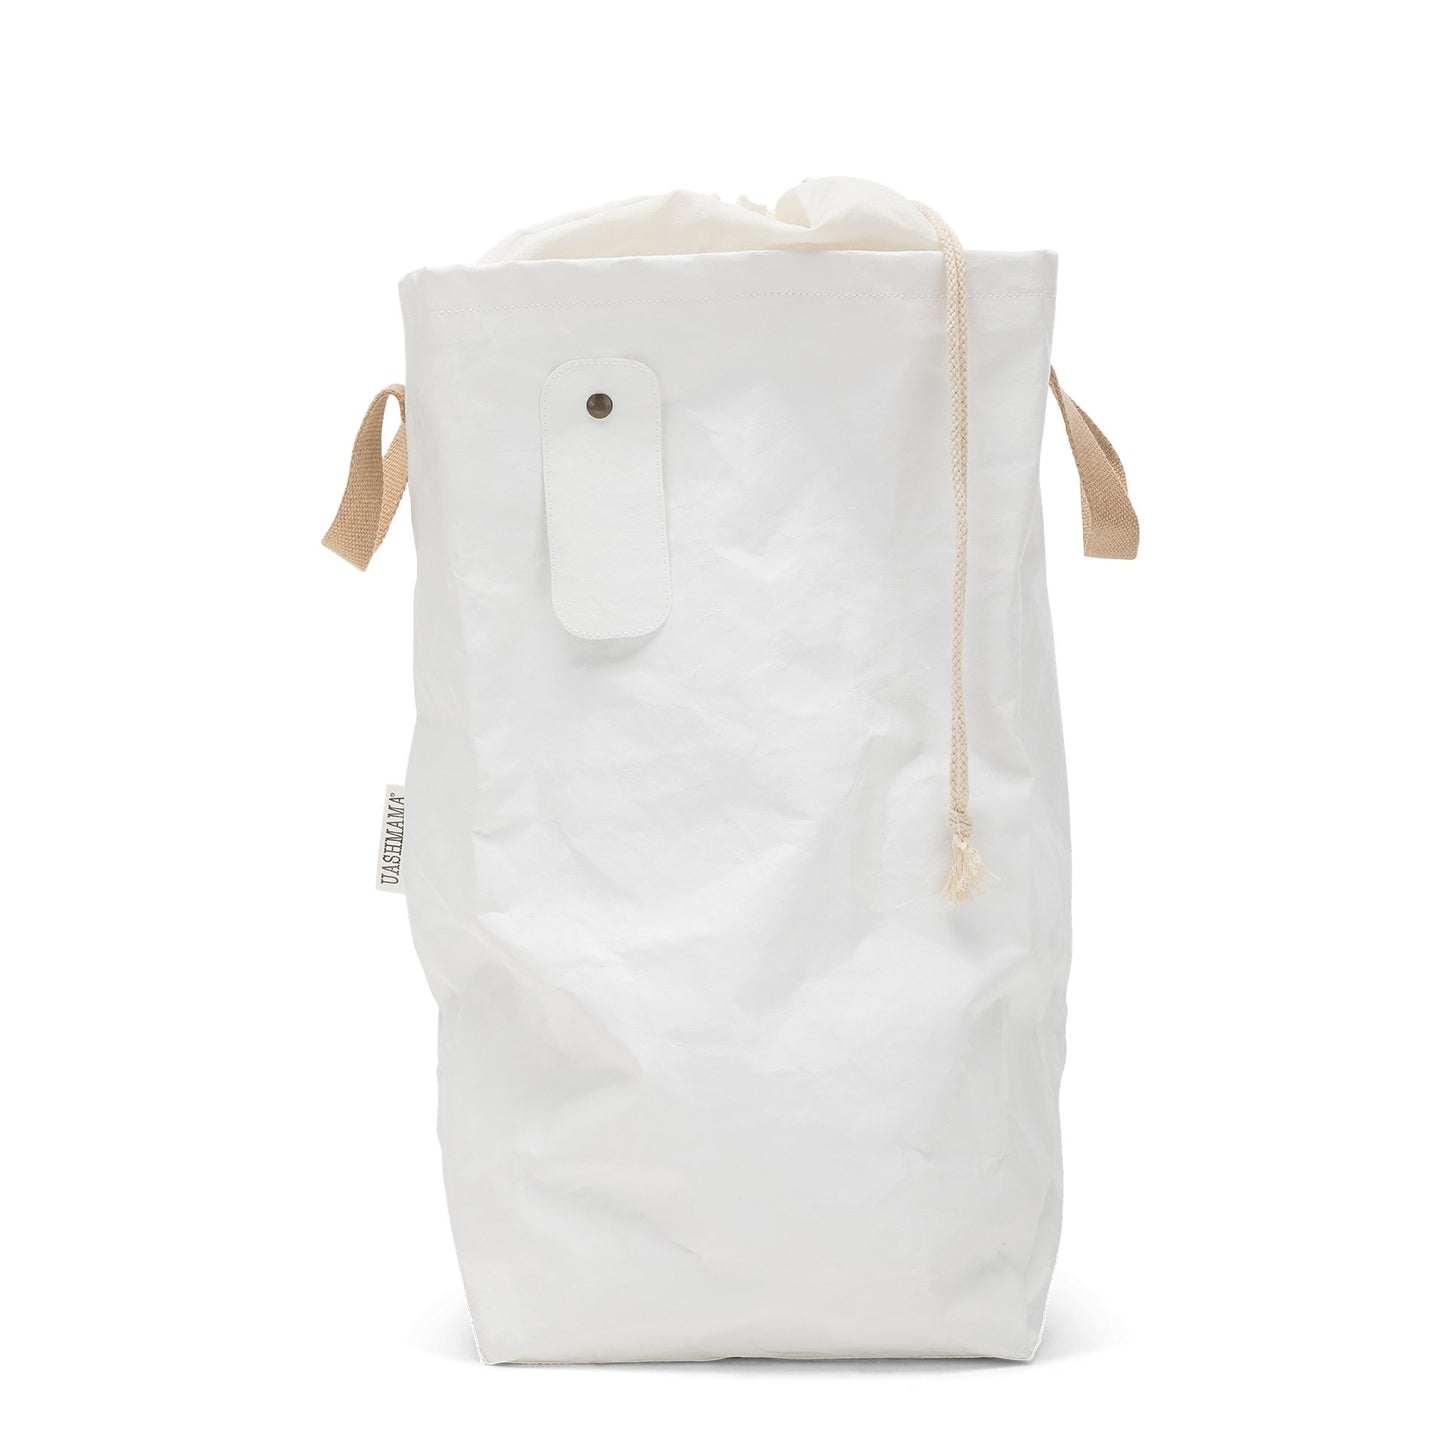 A washable paper laundry bag is shown in white. It features two side handles, a popper tab, and an interior drawstring lining.